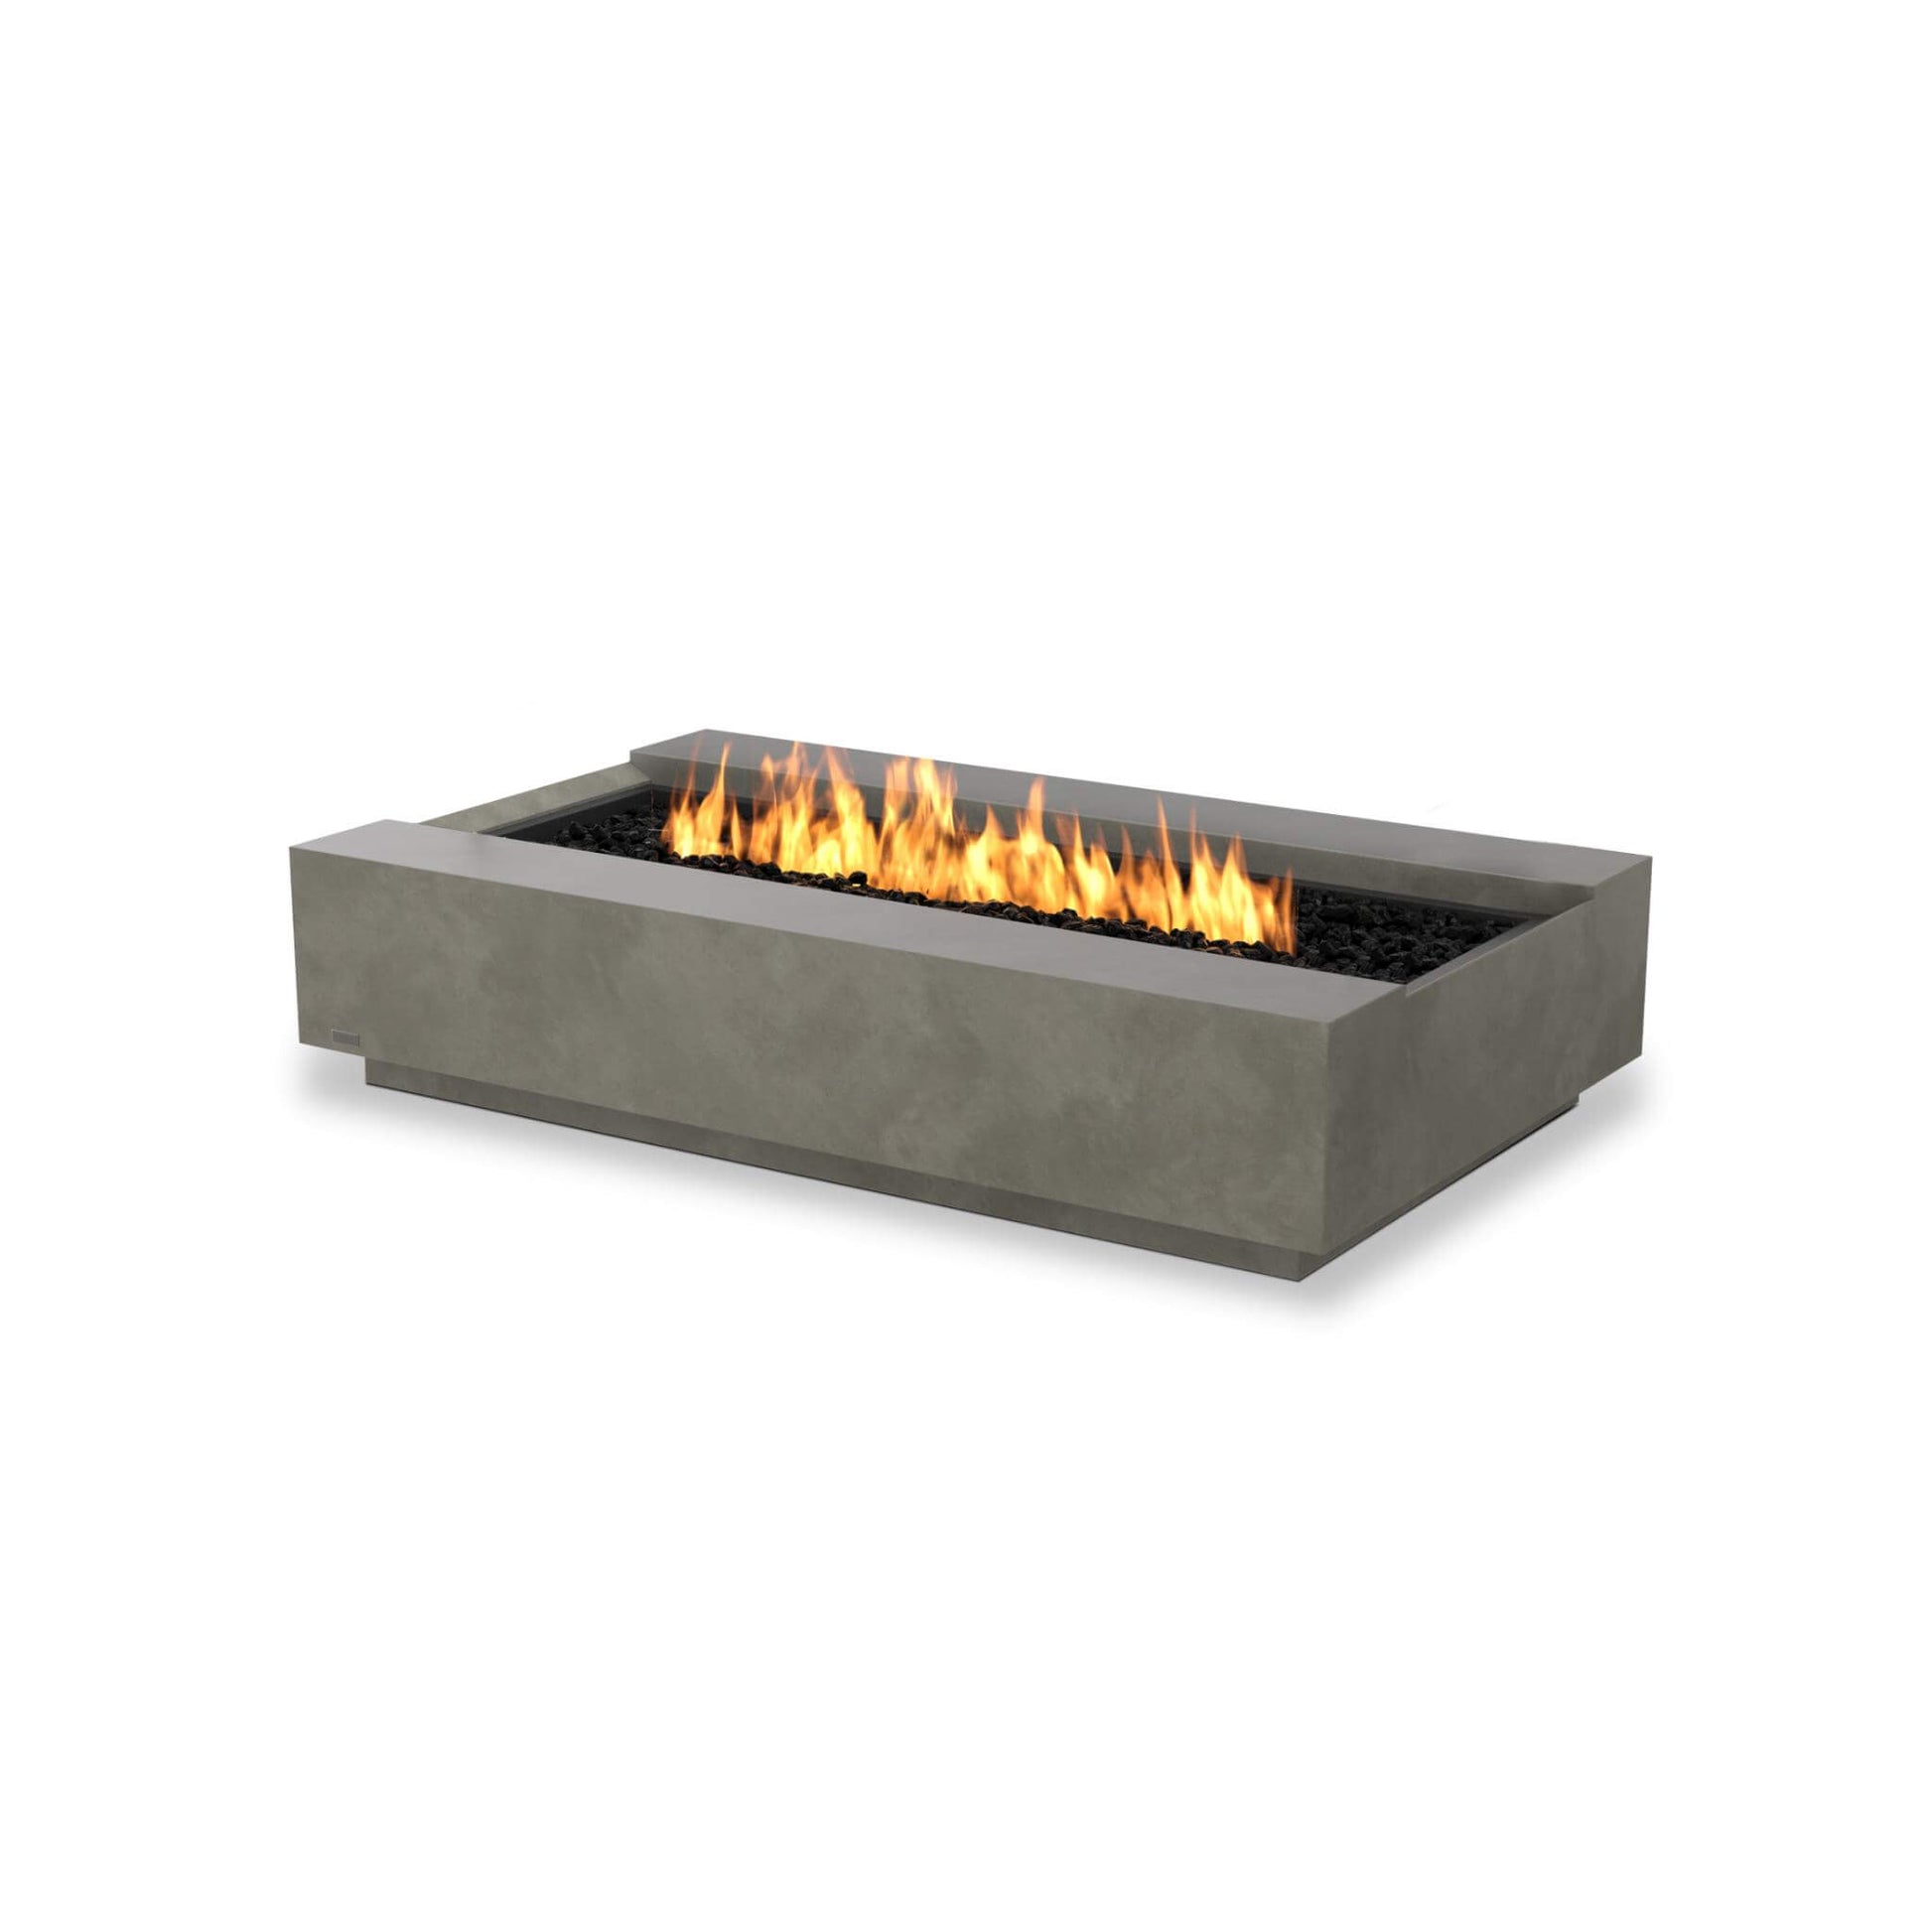 Cosmo 50 Linear Concrete Gas Fire Pit Coffee Table with  in Natural grey for Indoor & Outdoor Heating by Ecosmart Fire